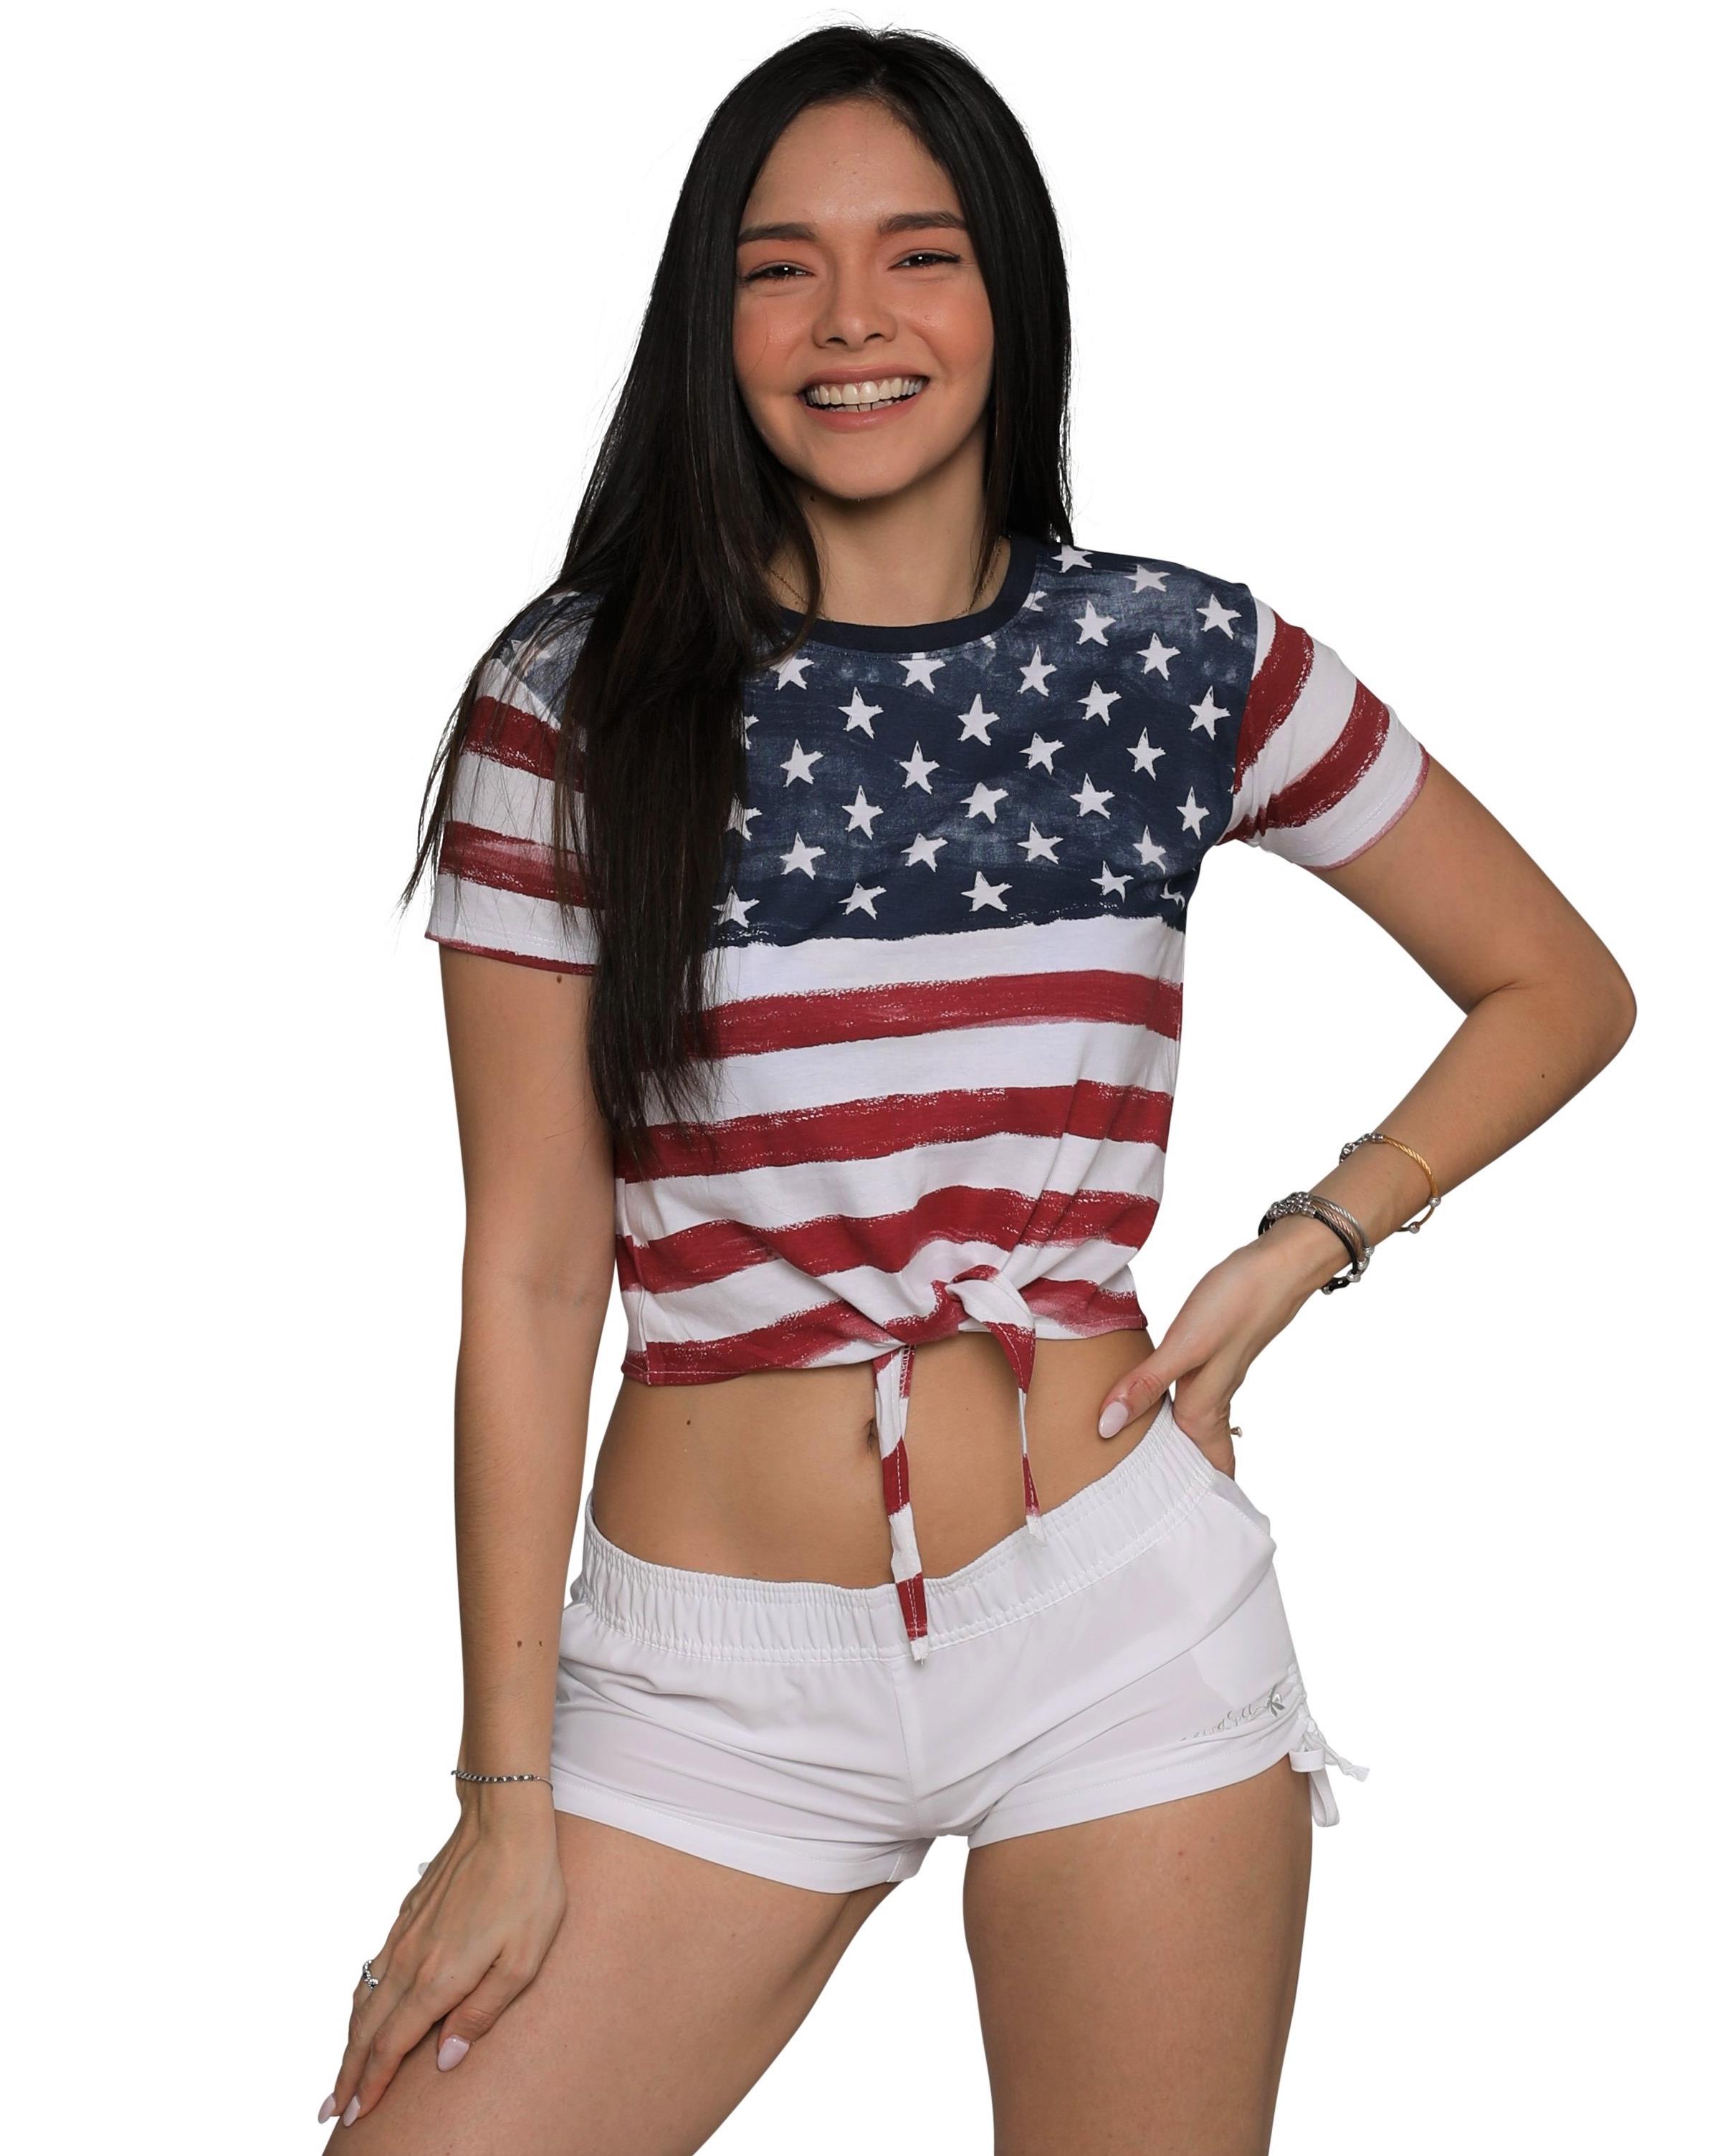 U.S. Vintage Knot Front Cuffed Sleeve / Sleeveless Stars and Stripes Crop Top Tee USA Patriotic T-Shirt, Stars, Size: Large - image 1 of 4